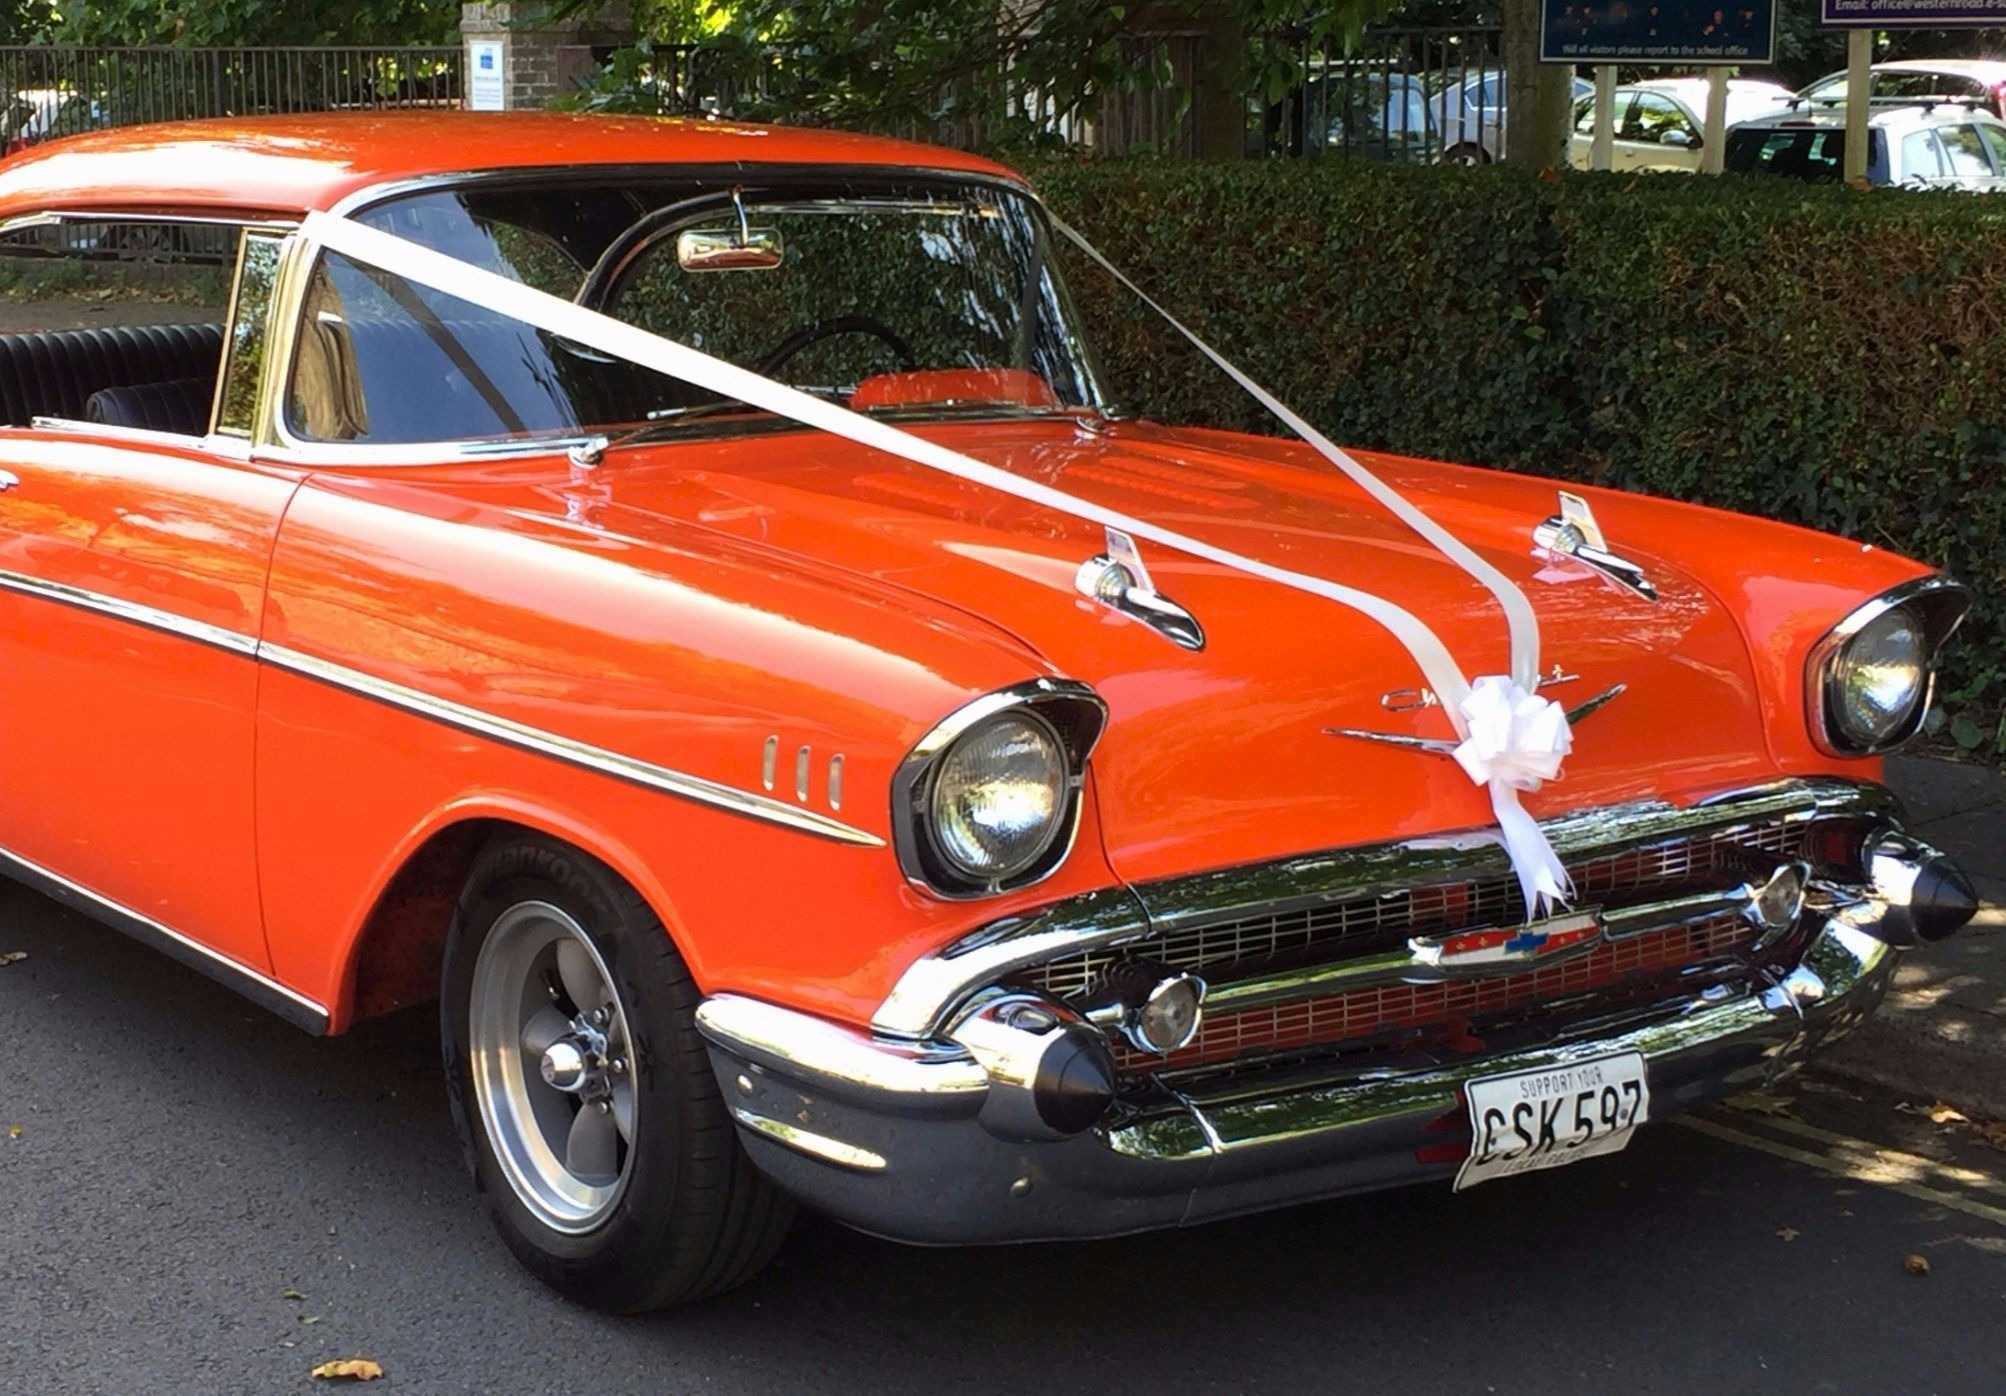 1957 Chevrolet 210 Sports Coupe – “Clarence”